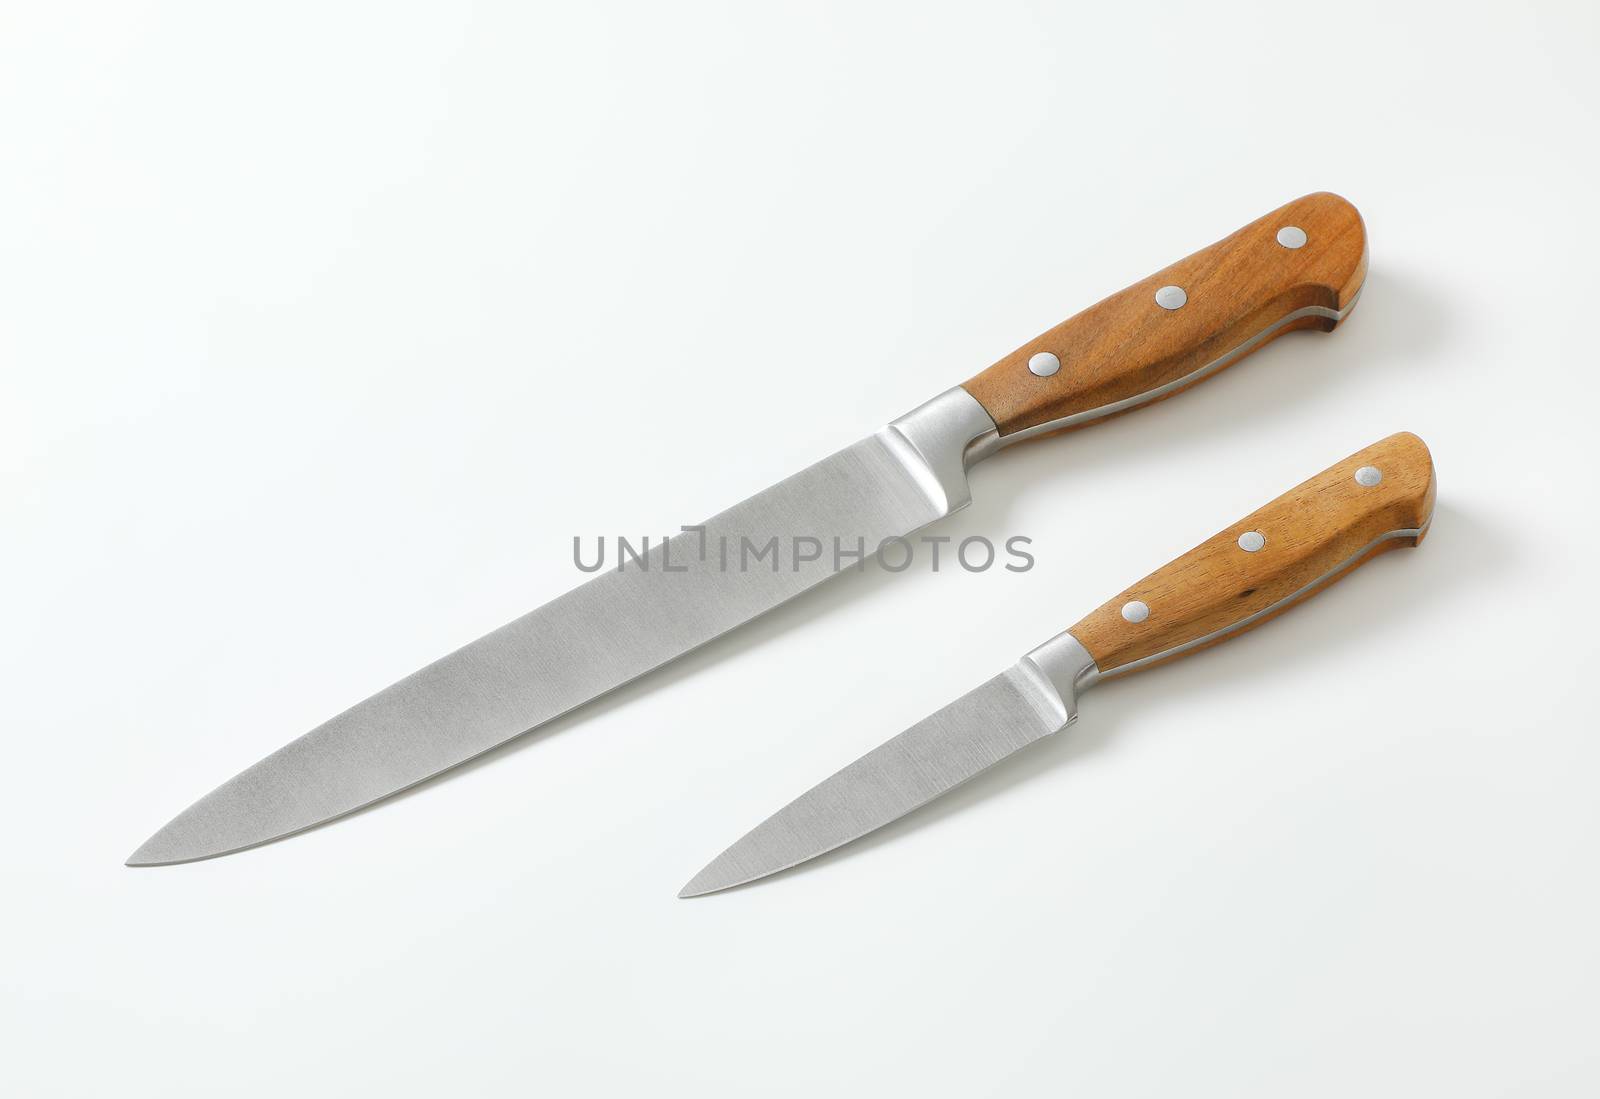 Two sharp kitchen knives by Digifoodstock